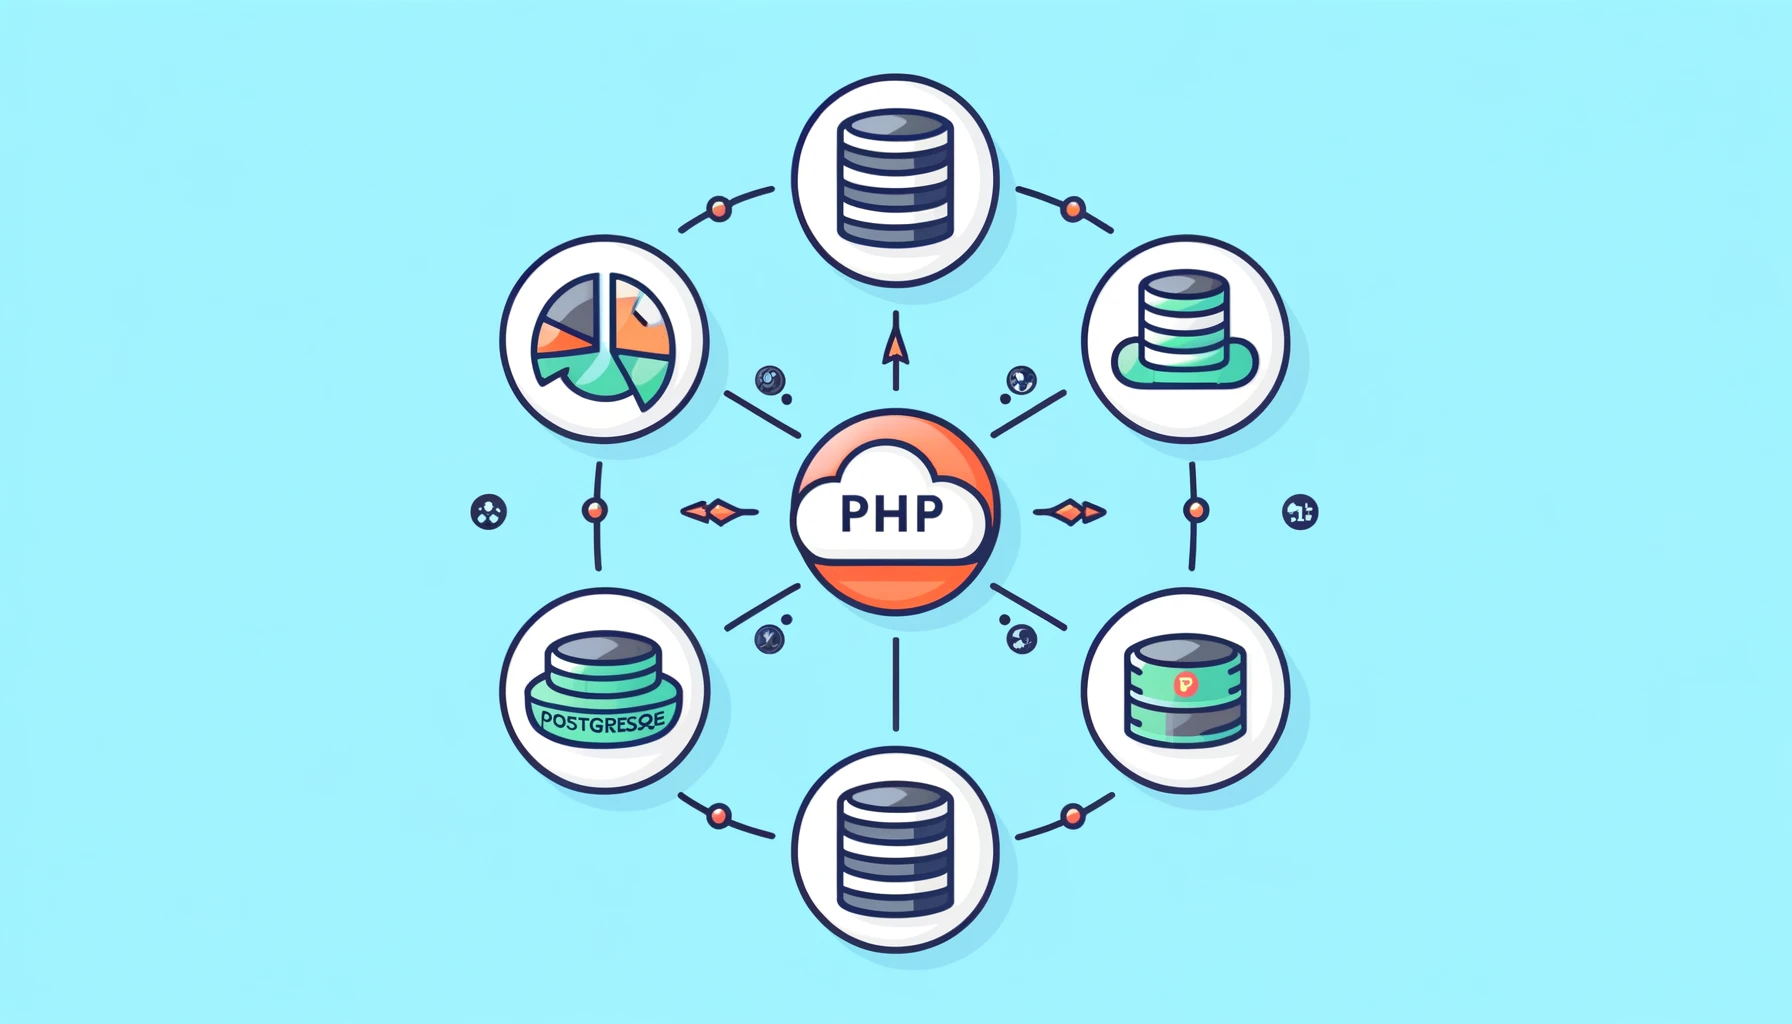 Fthe connection between PHP Generator and various databases.